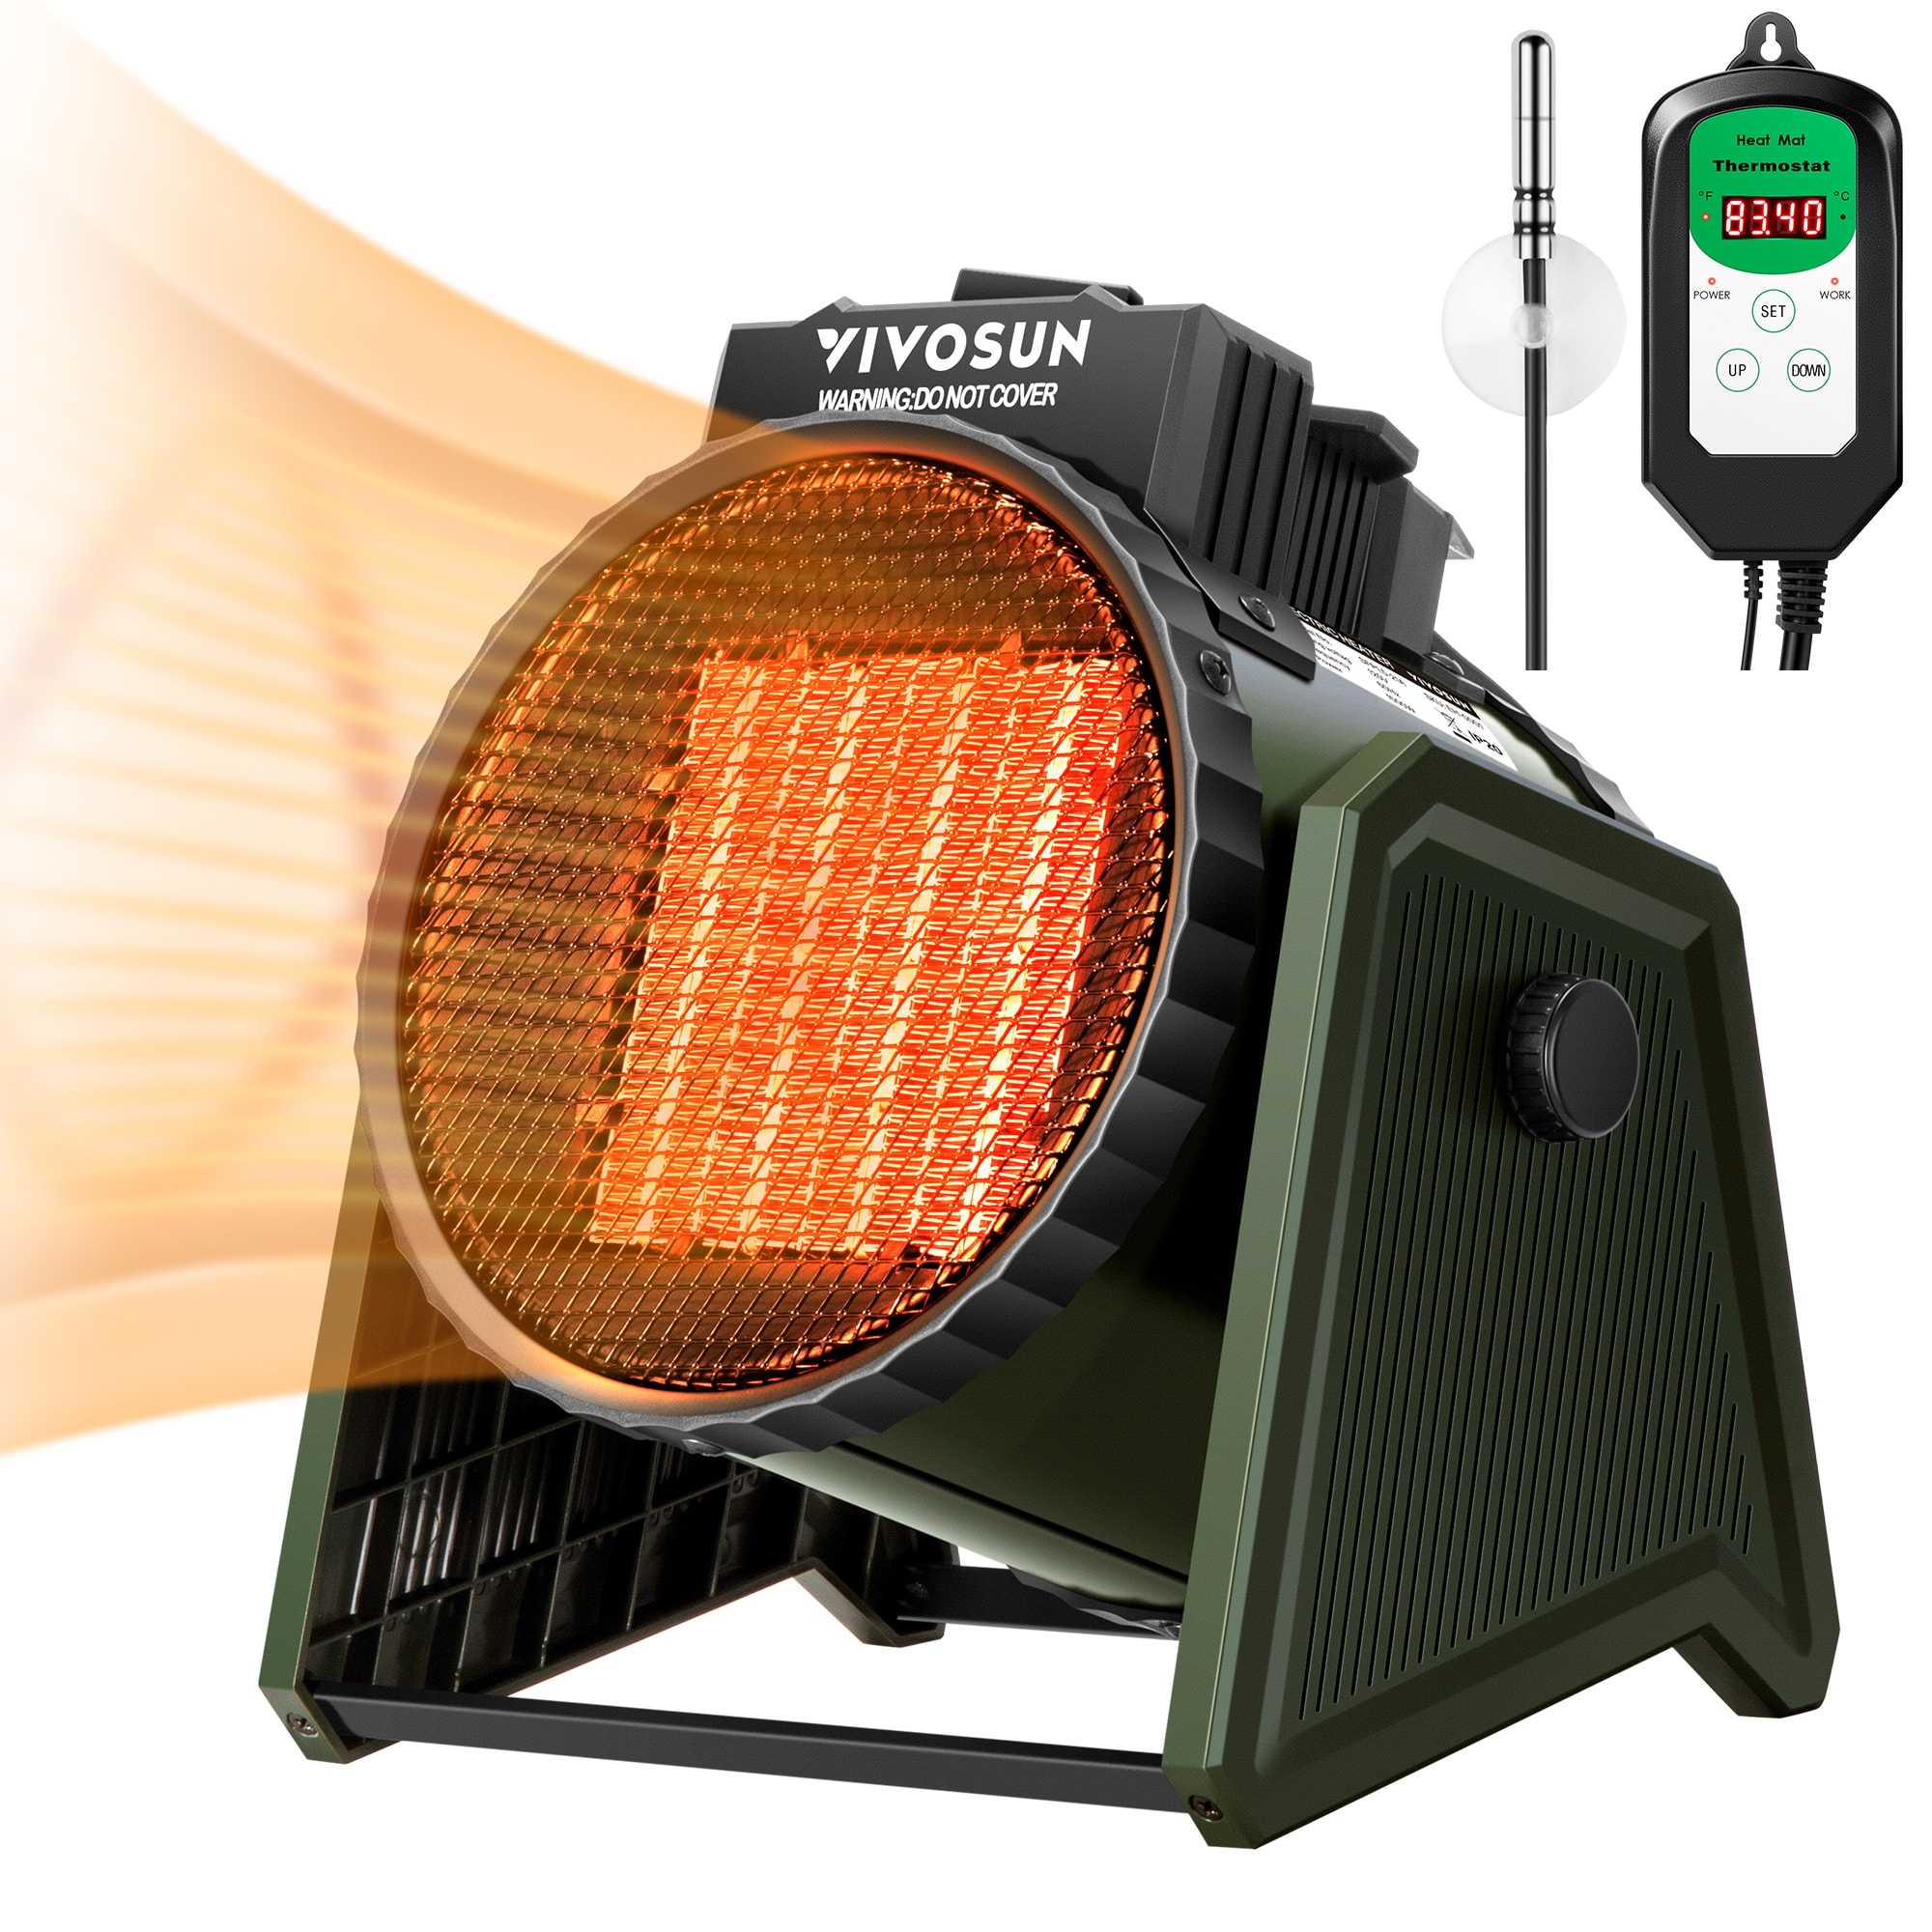 VIVOSUN 1500W Space Heater for Indoor Use, Portable Electric Heater with  Adjustable Thermostat, 1500W/900W/700W/Fan Only with 4 Modes for PTC Fast  Heating, Overheat & Tip-over Protection, ETL Listed